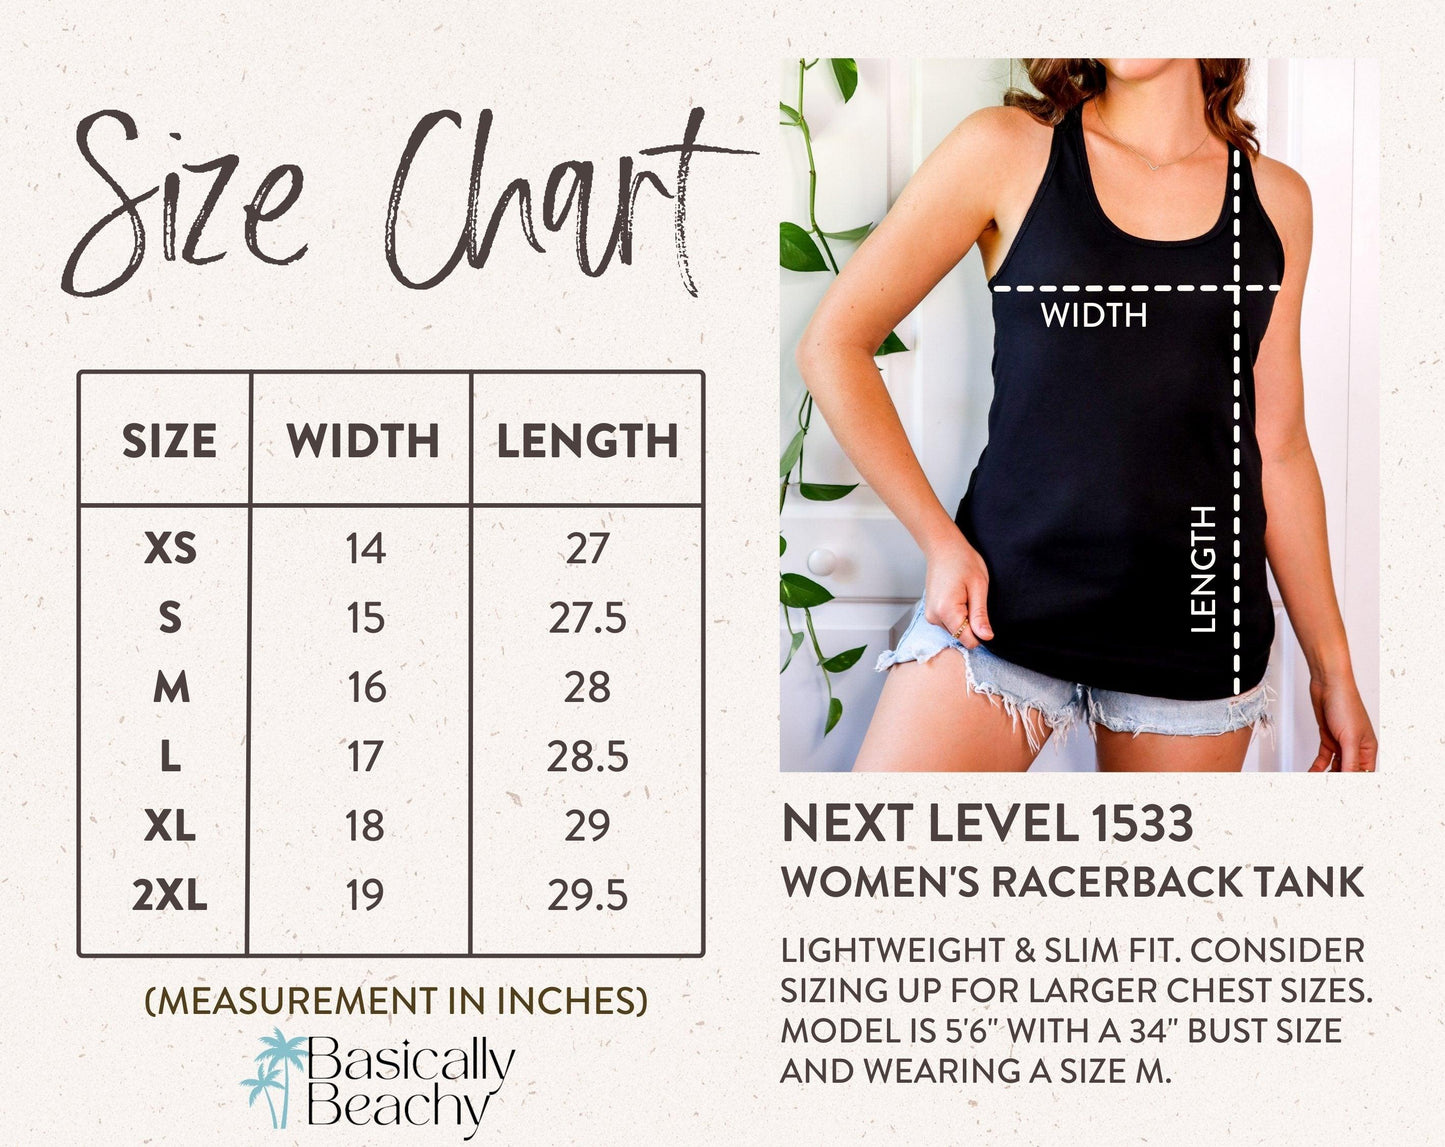 Funny Valentine Candy Workout Tank Top for Women - Basically Beachy